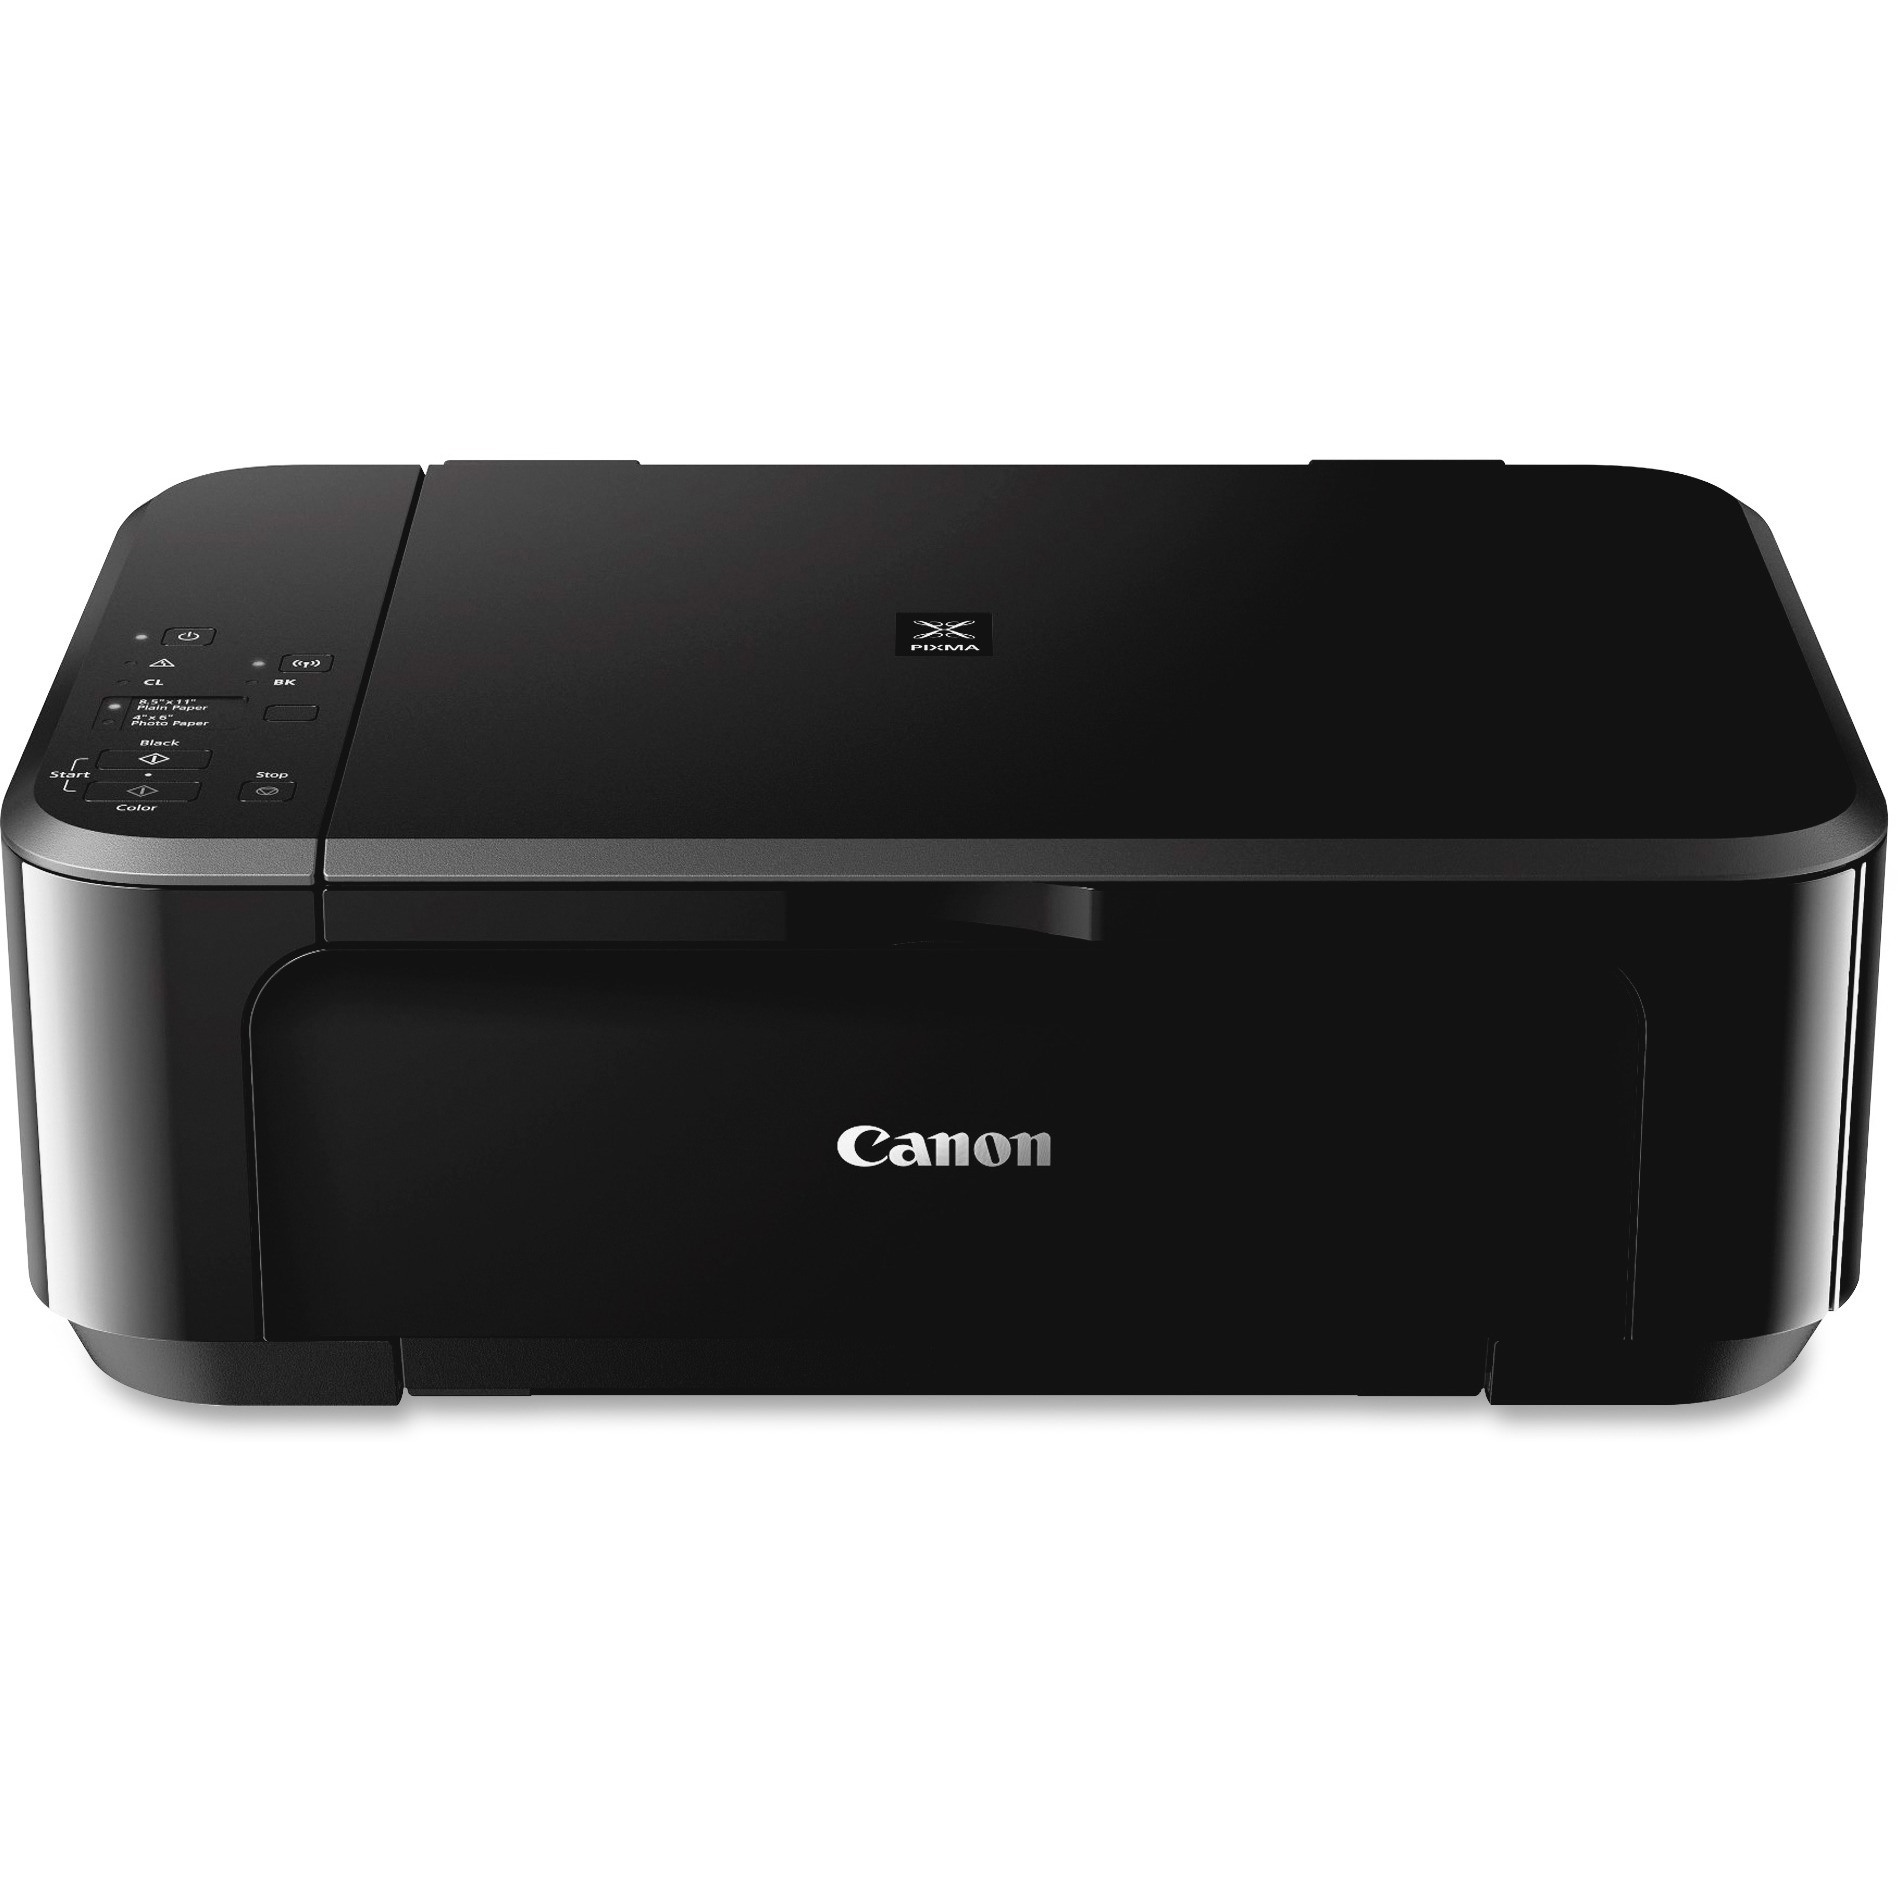 Canon PIXMA MG3620 Wireless All-in-One Color Inkjet Photo Printer, Black - image 1 of 7